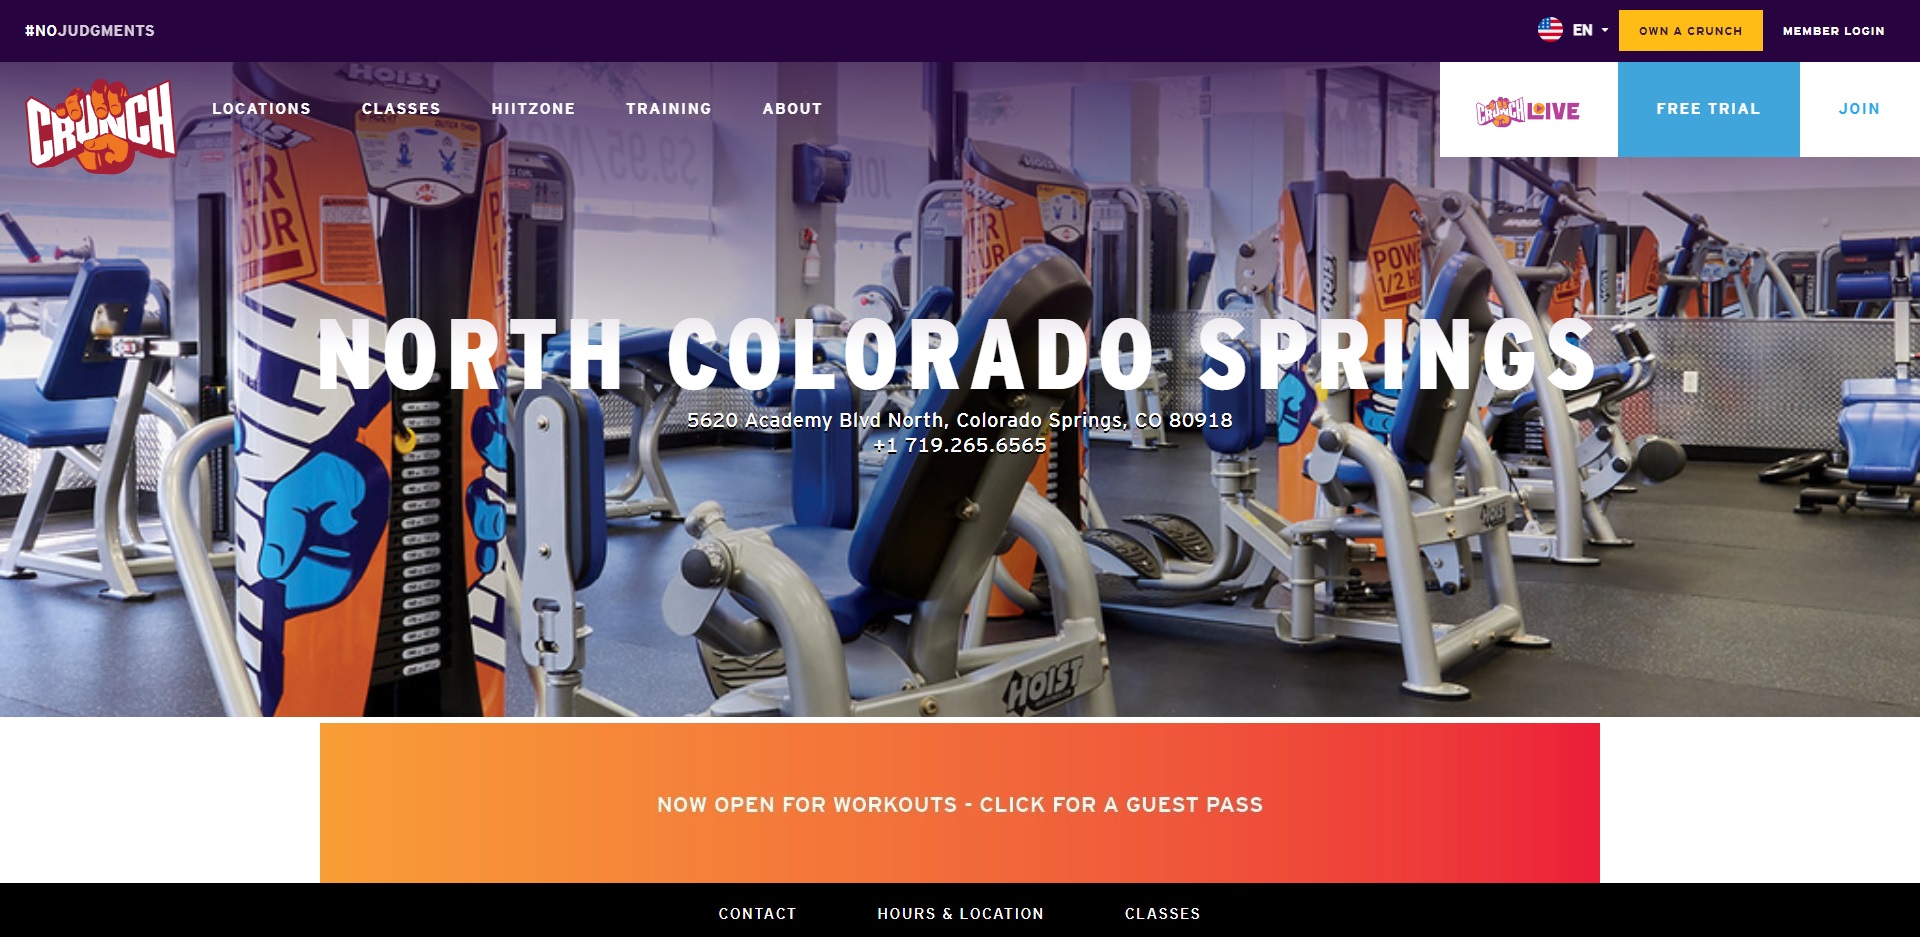 The Best Sports Clubs in Colorado Springs, CO